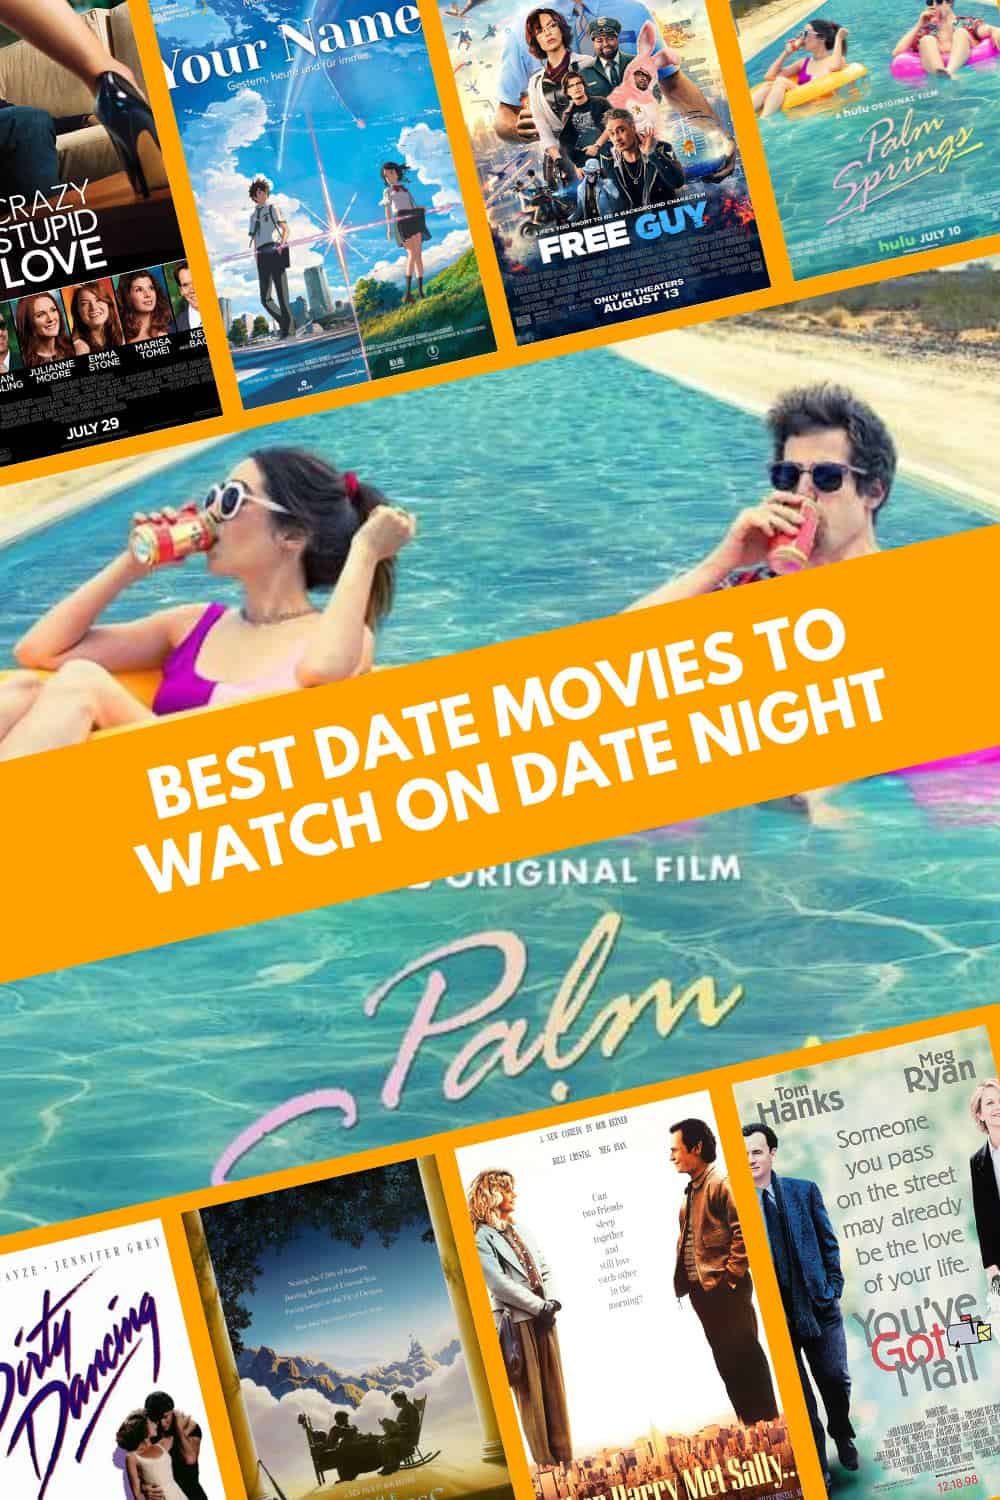 Best Date Movies to Watch on Date Night